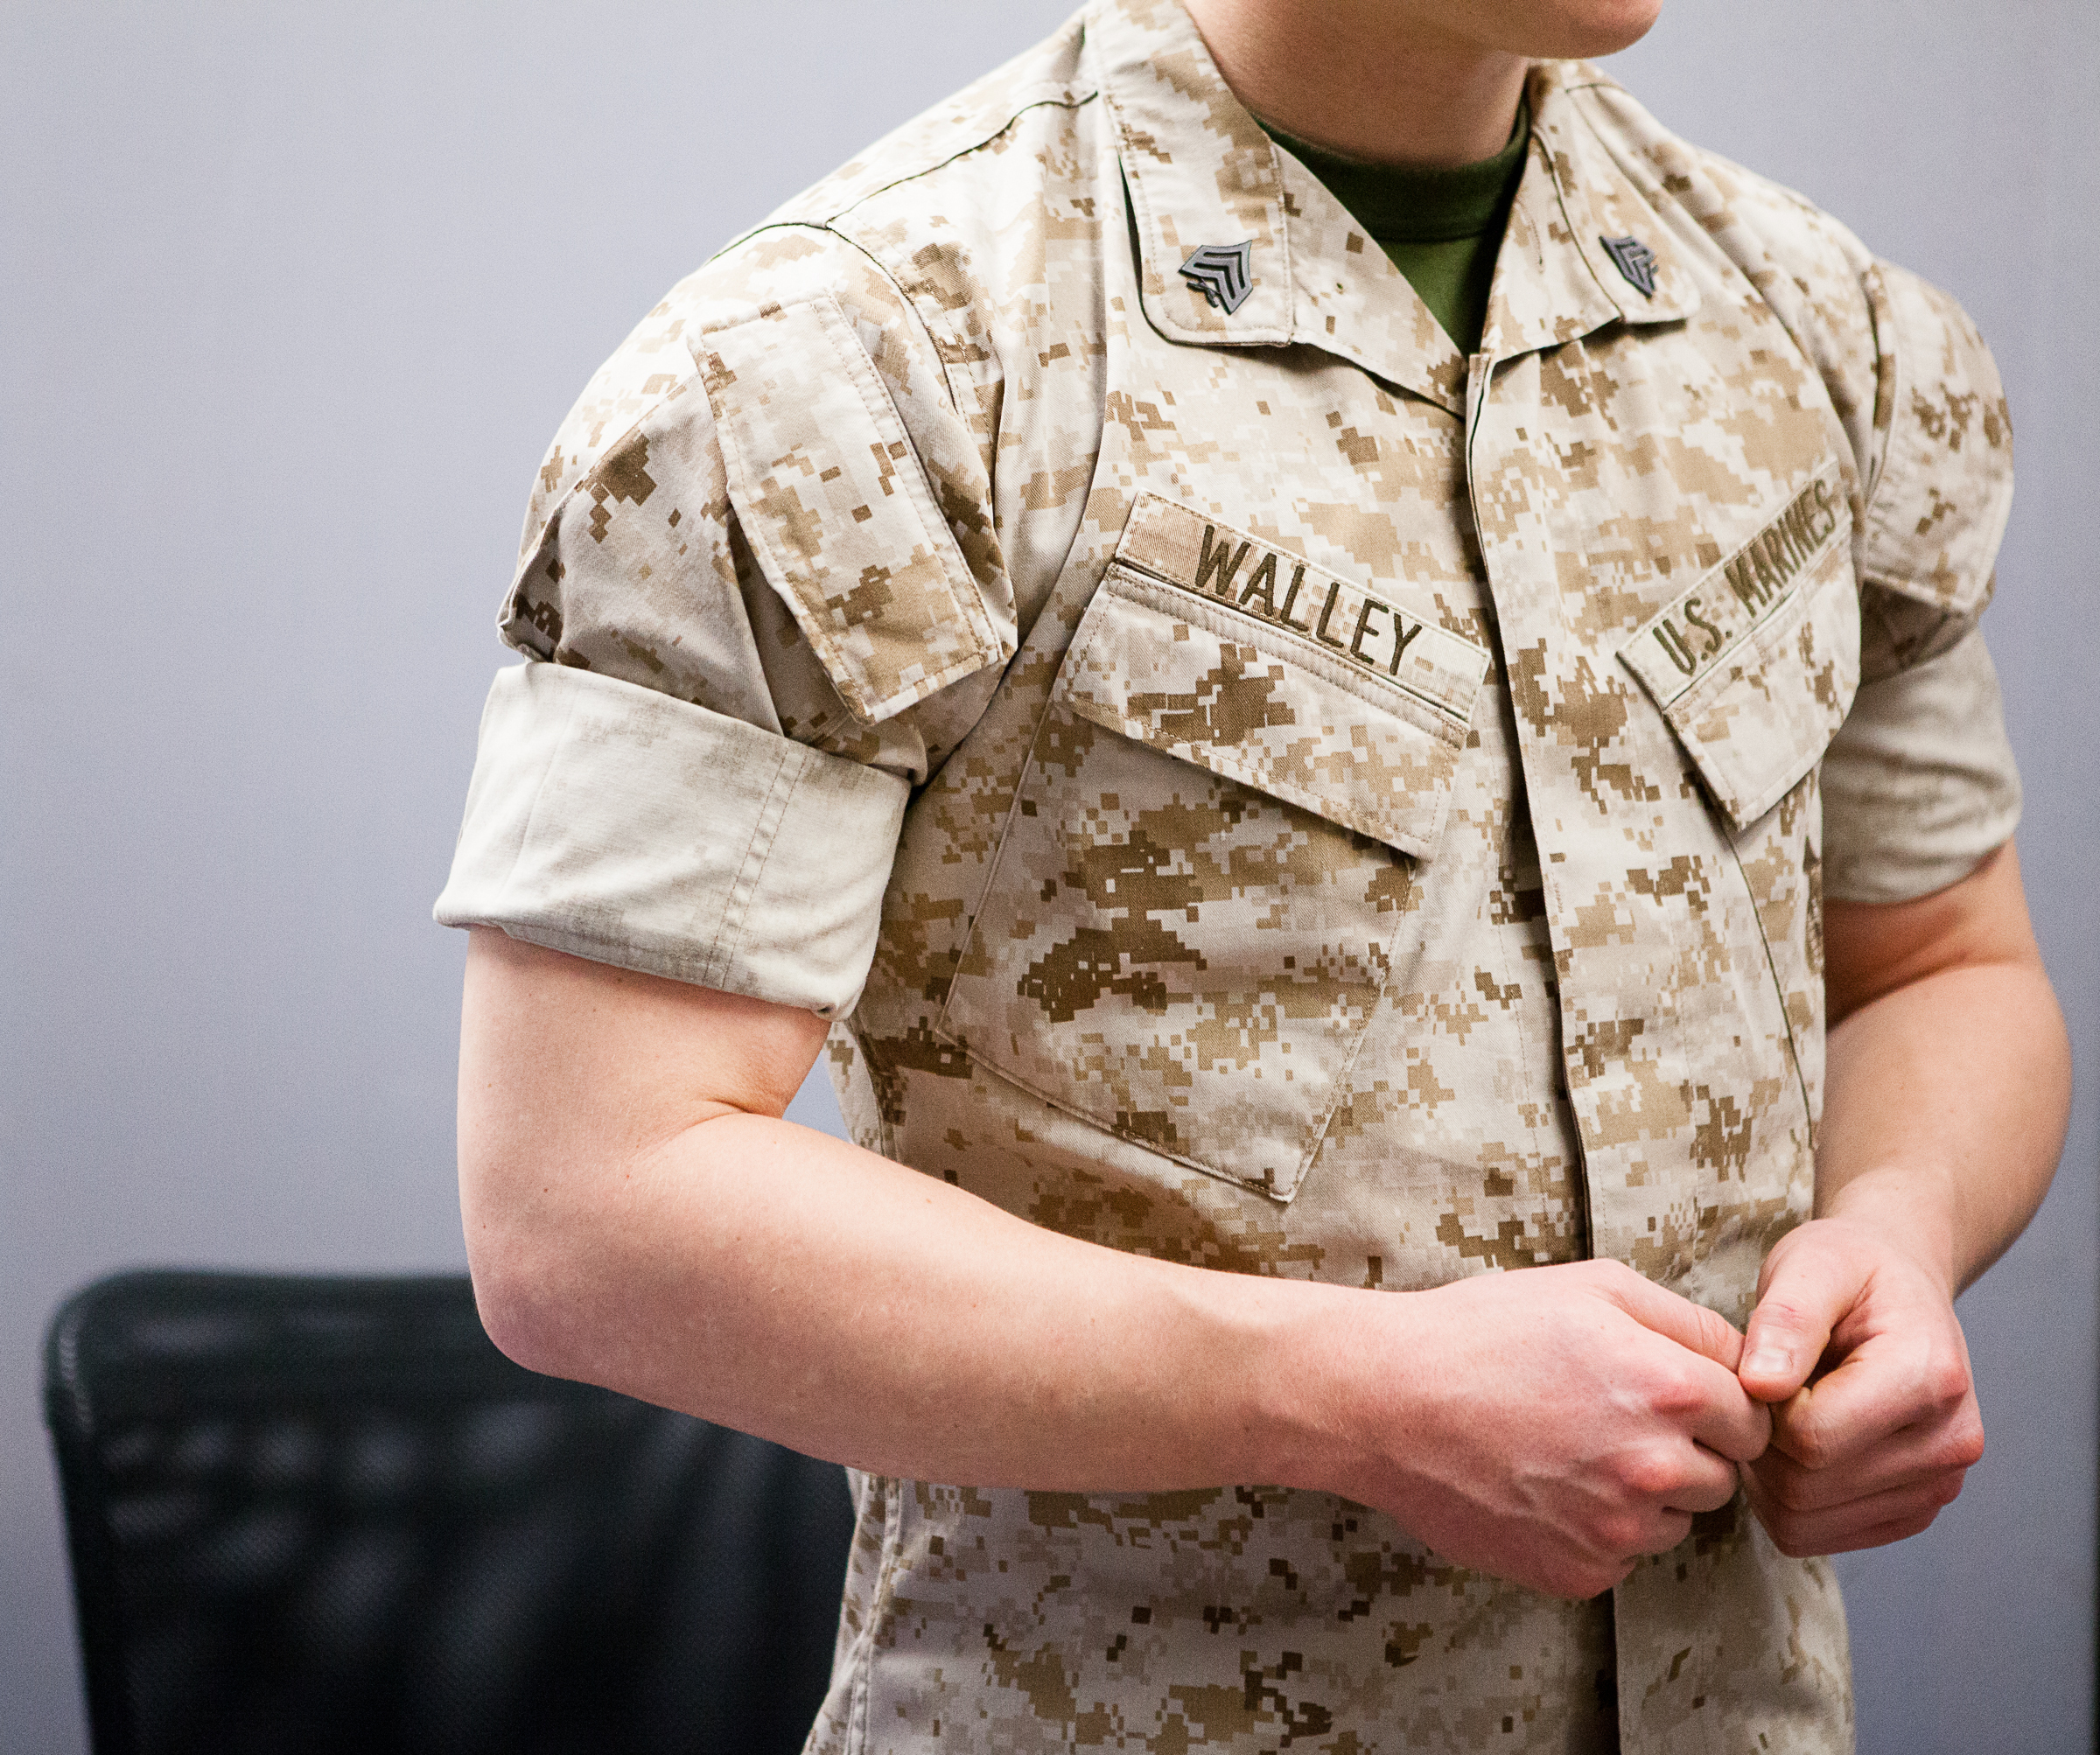 Roll your sleeves too tight, Marines? This guy has the solution.